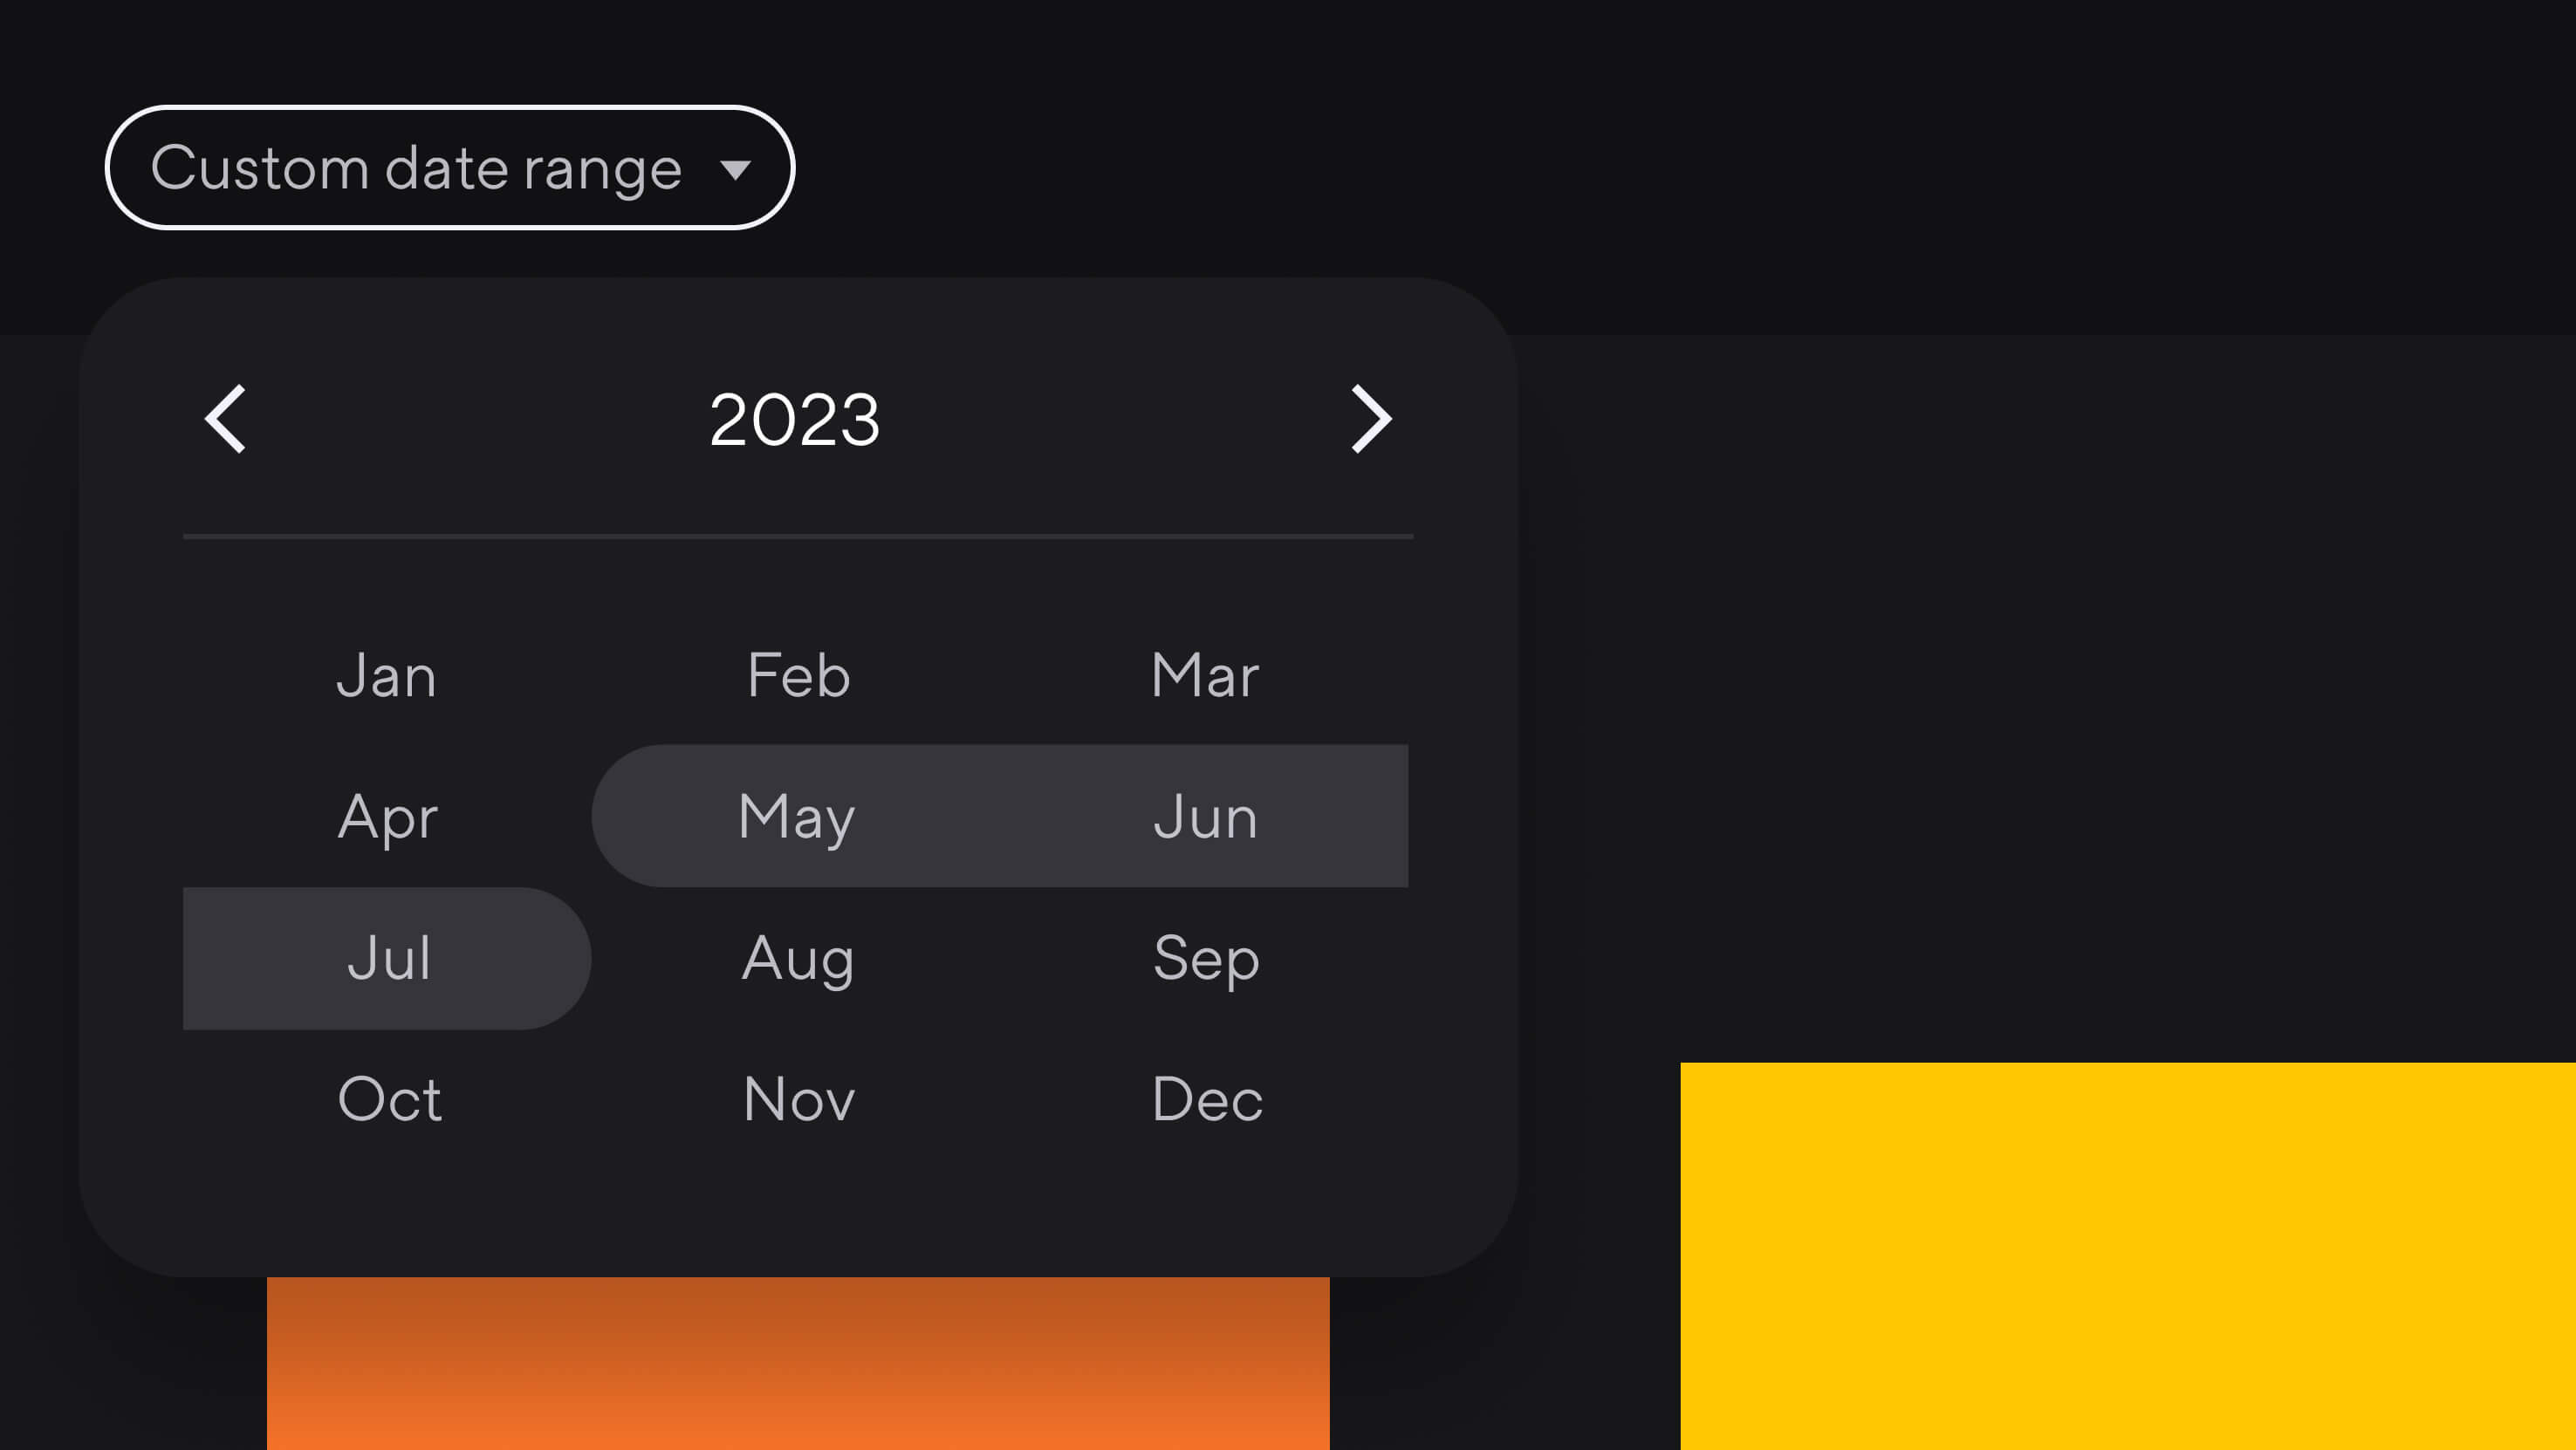 Here we see a zoomed-in shot of the new date range selector in Dandi. It looks like a basic calendar interface and is very easy to use.